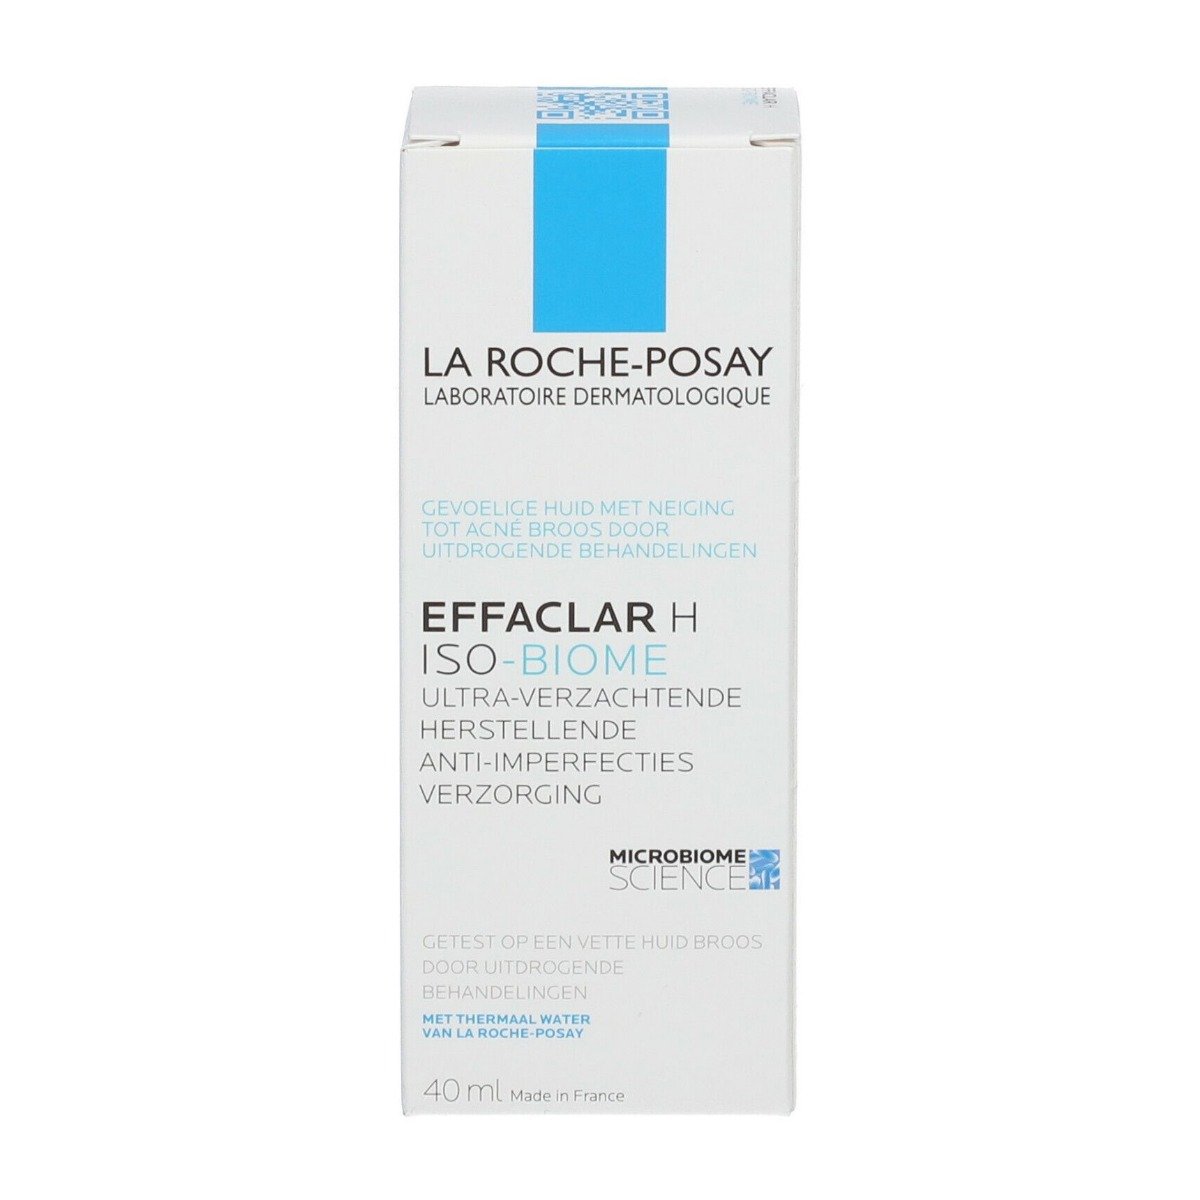 La Roche Posay Effaclar H Iso-Biome Ultra Soothing Hydrating Care Cream - 40ml - Bloom Pharmacy